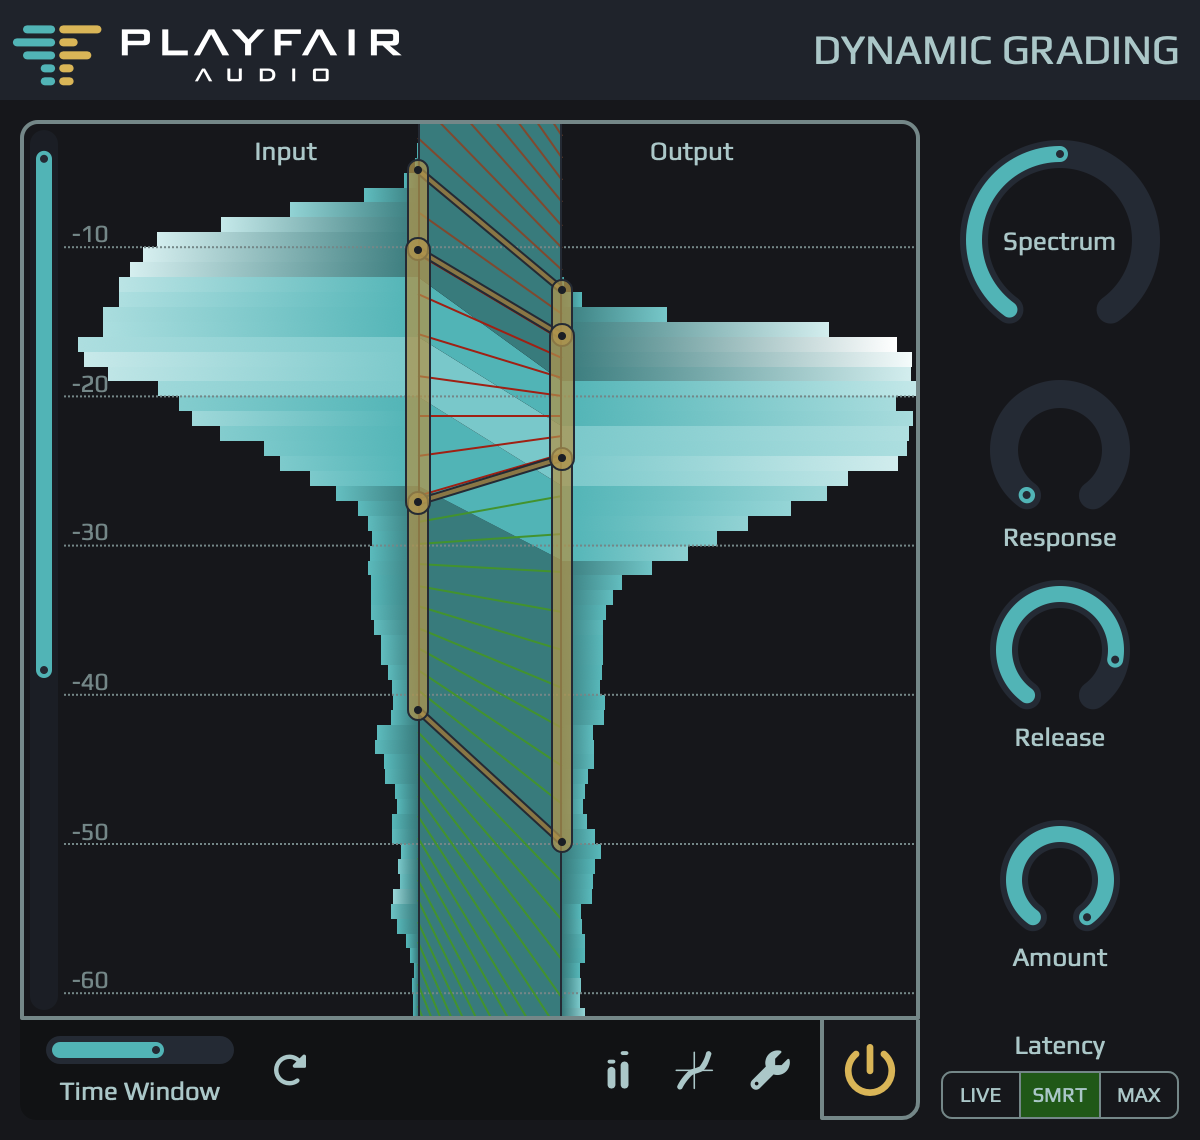 Here, Dynamic Grading is used on a lead vocal track to compress the punch range (taming consonant peaks), compress the body (smoothing RMS-level fluctuations) and expand the floor.